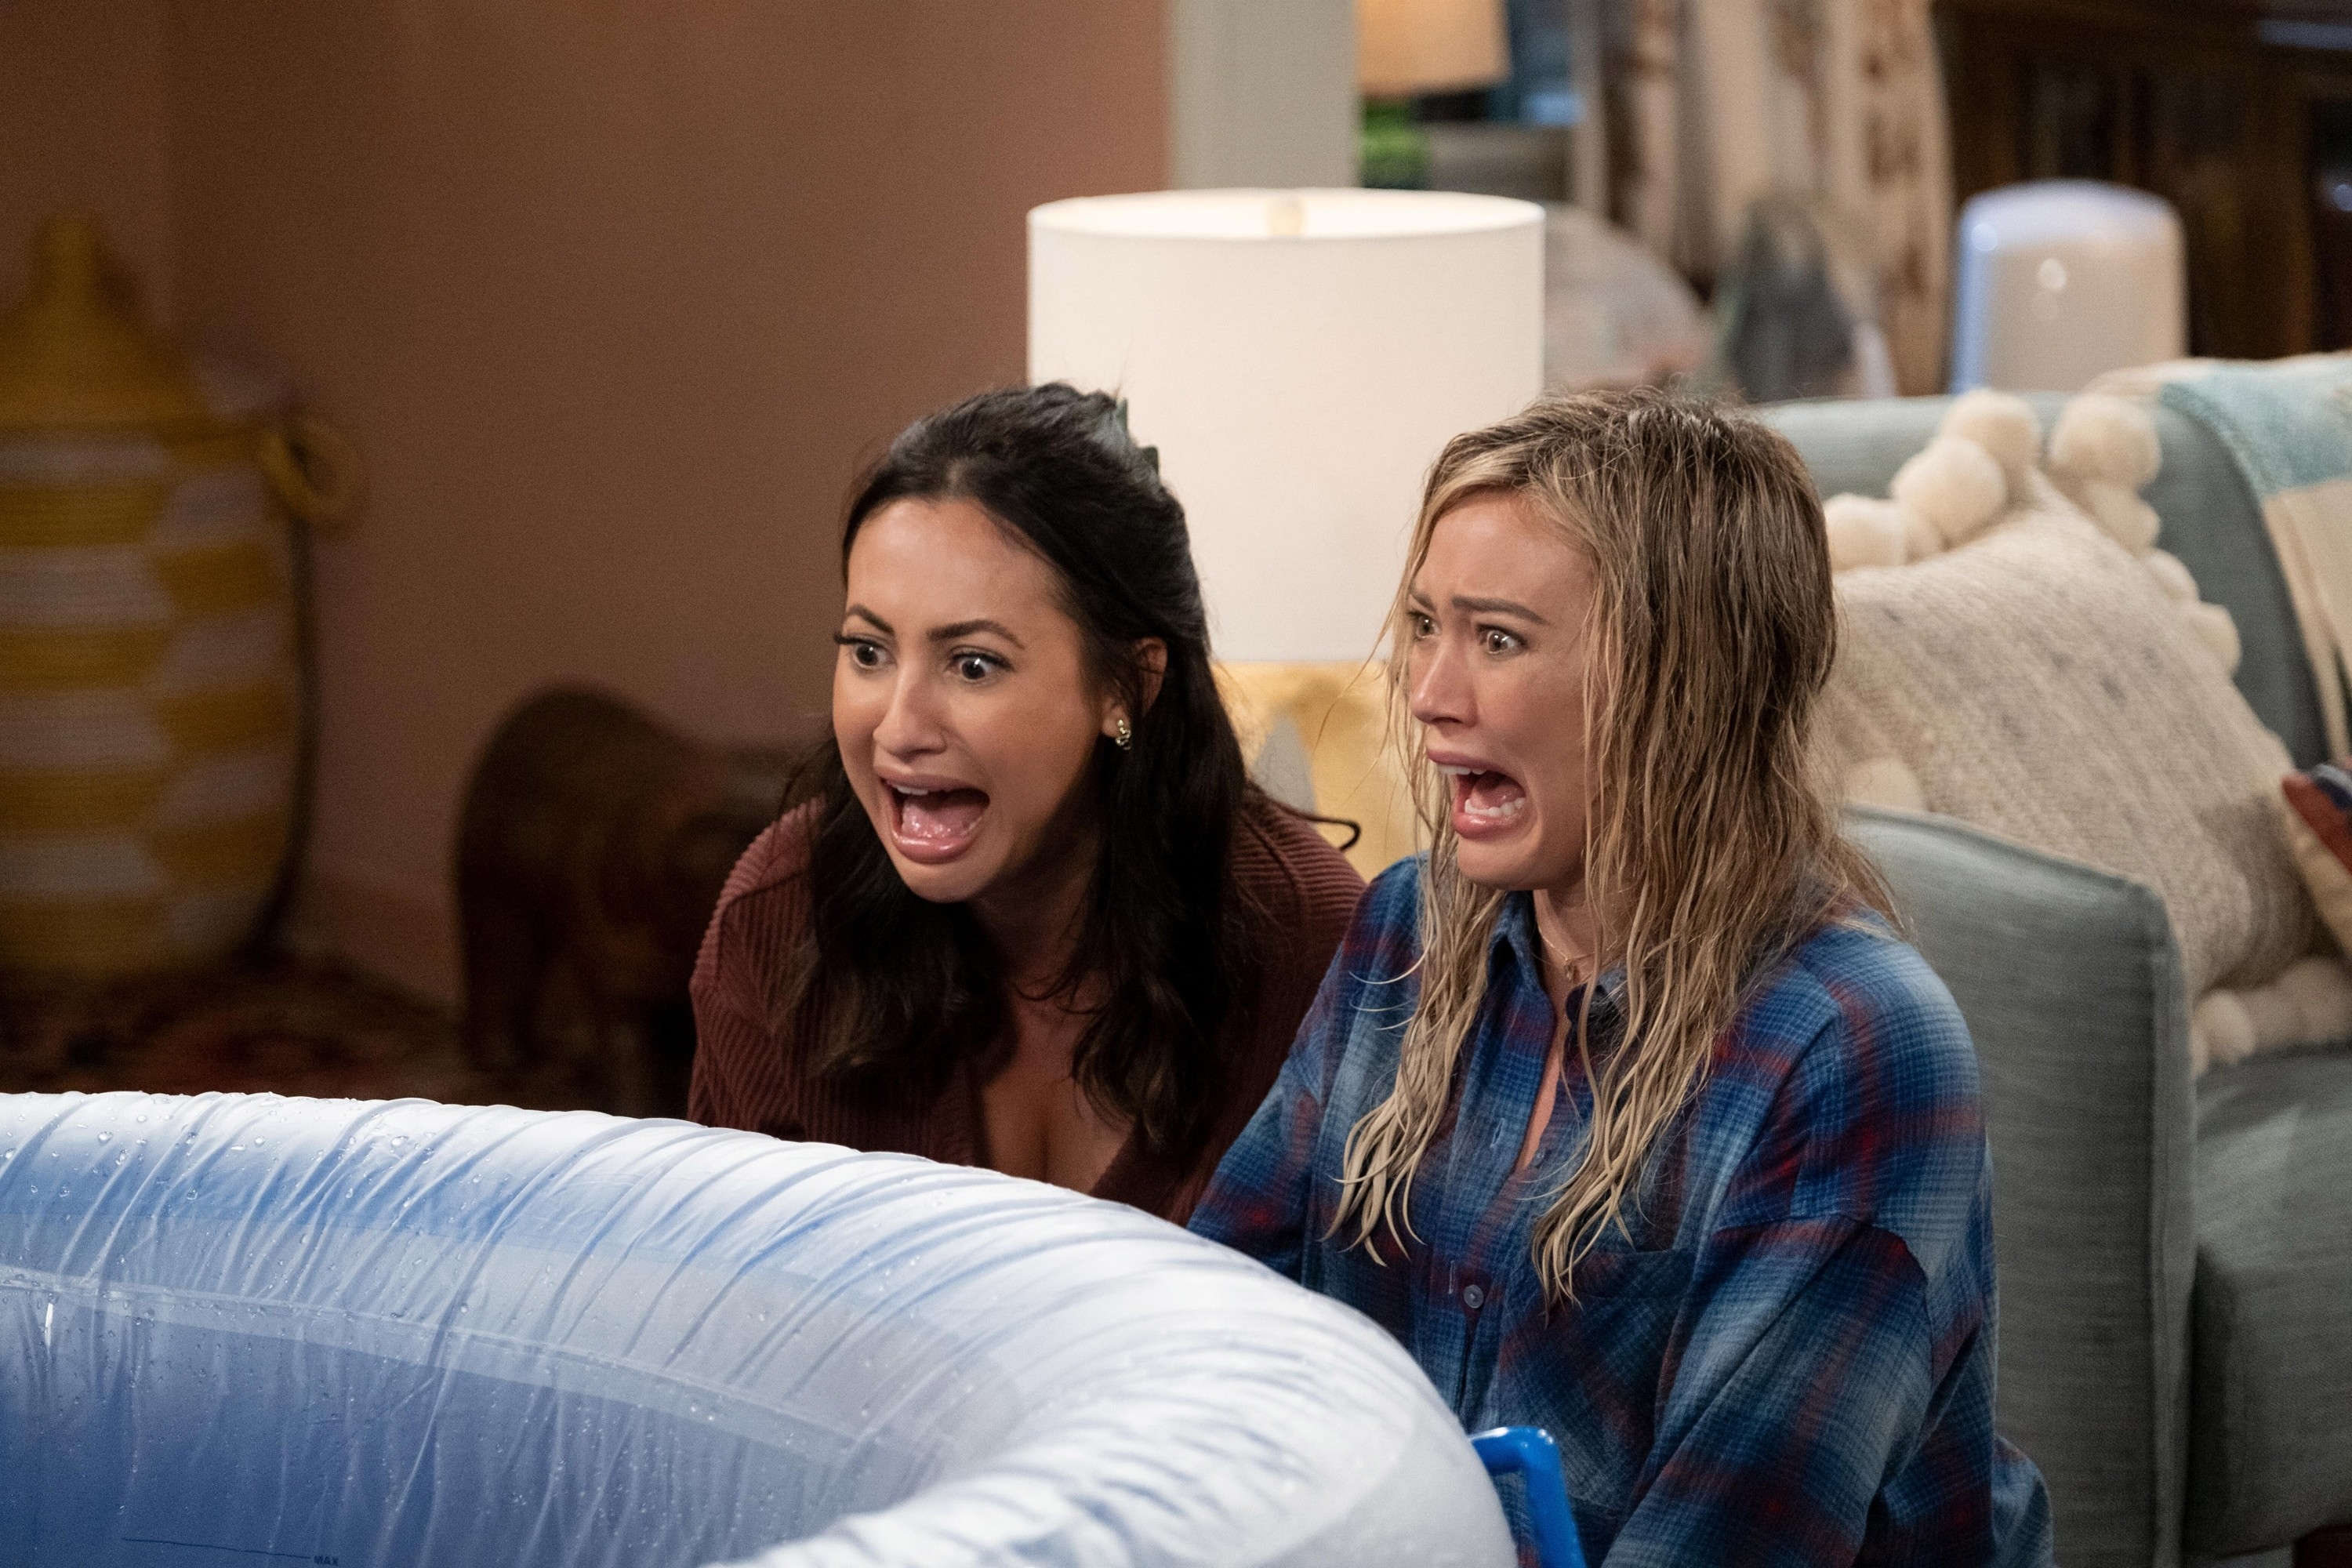 Two characters from a TV show react with shock while sitting on a couch, one in a plaid shirt